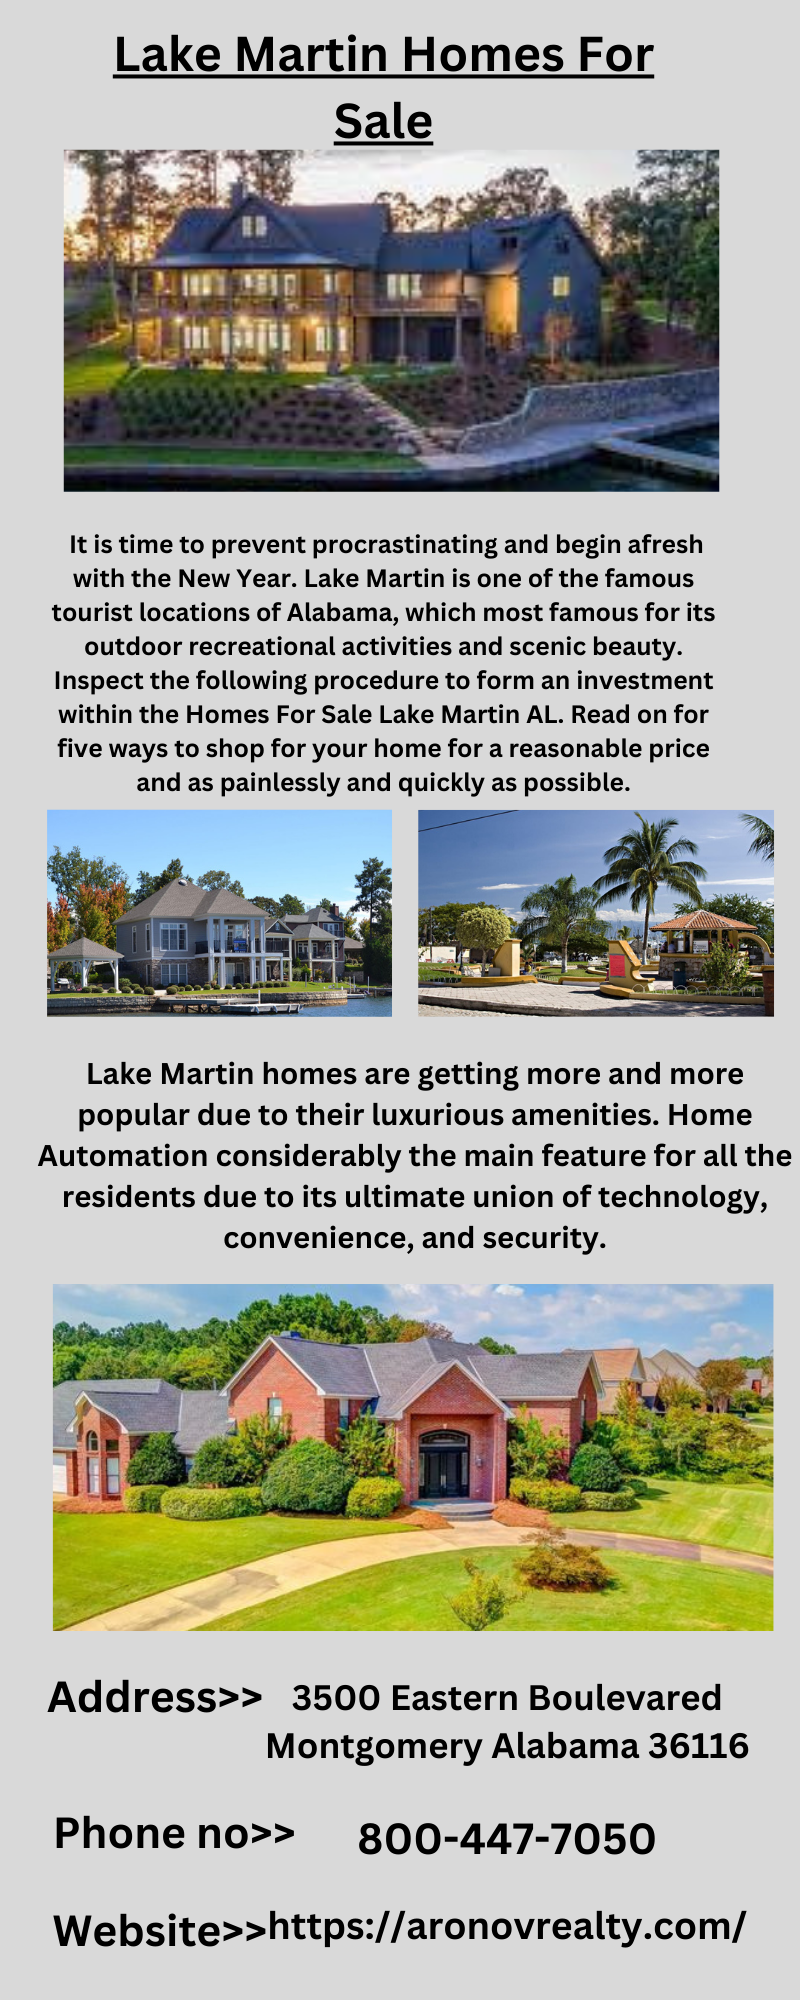 Most Delightful Lake Martin Homes For Sale